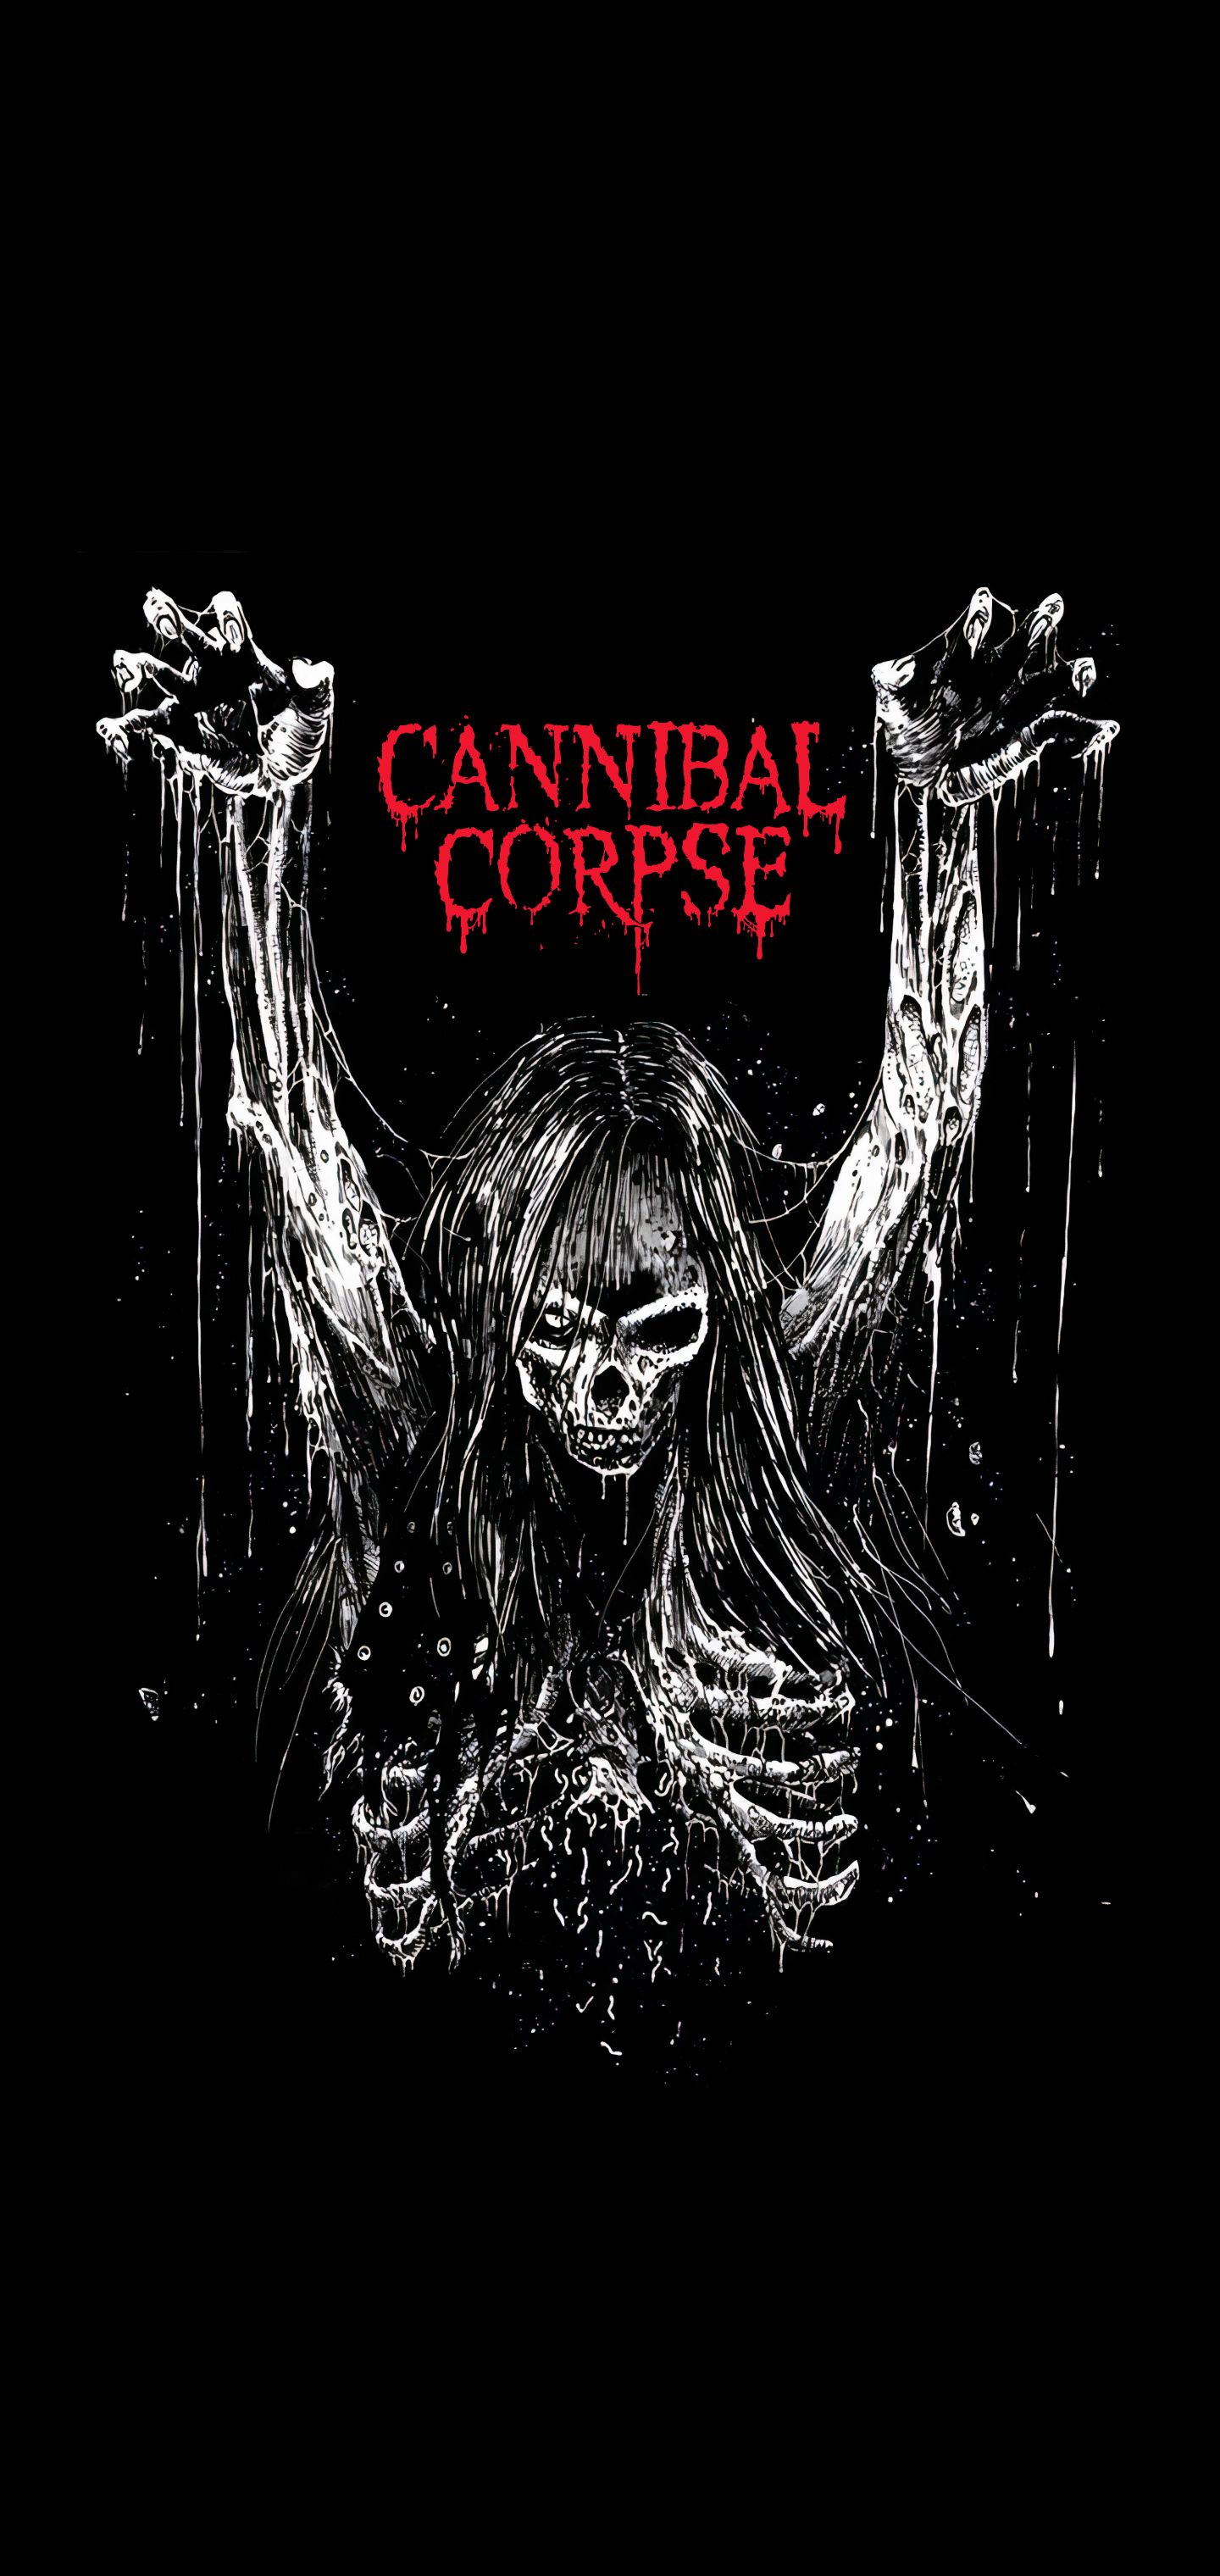 Wallpaper for mobile devices music, cannibal corpse